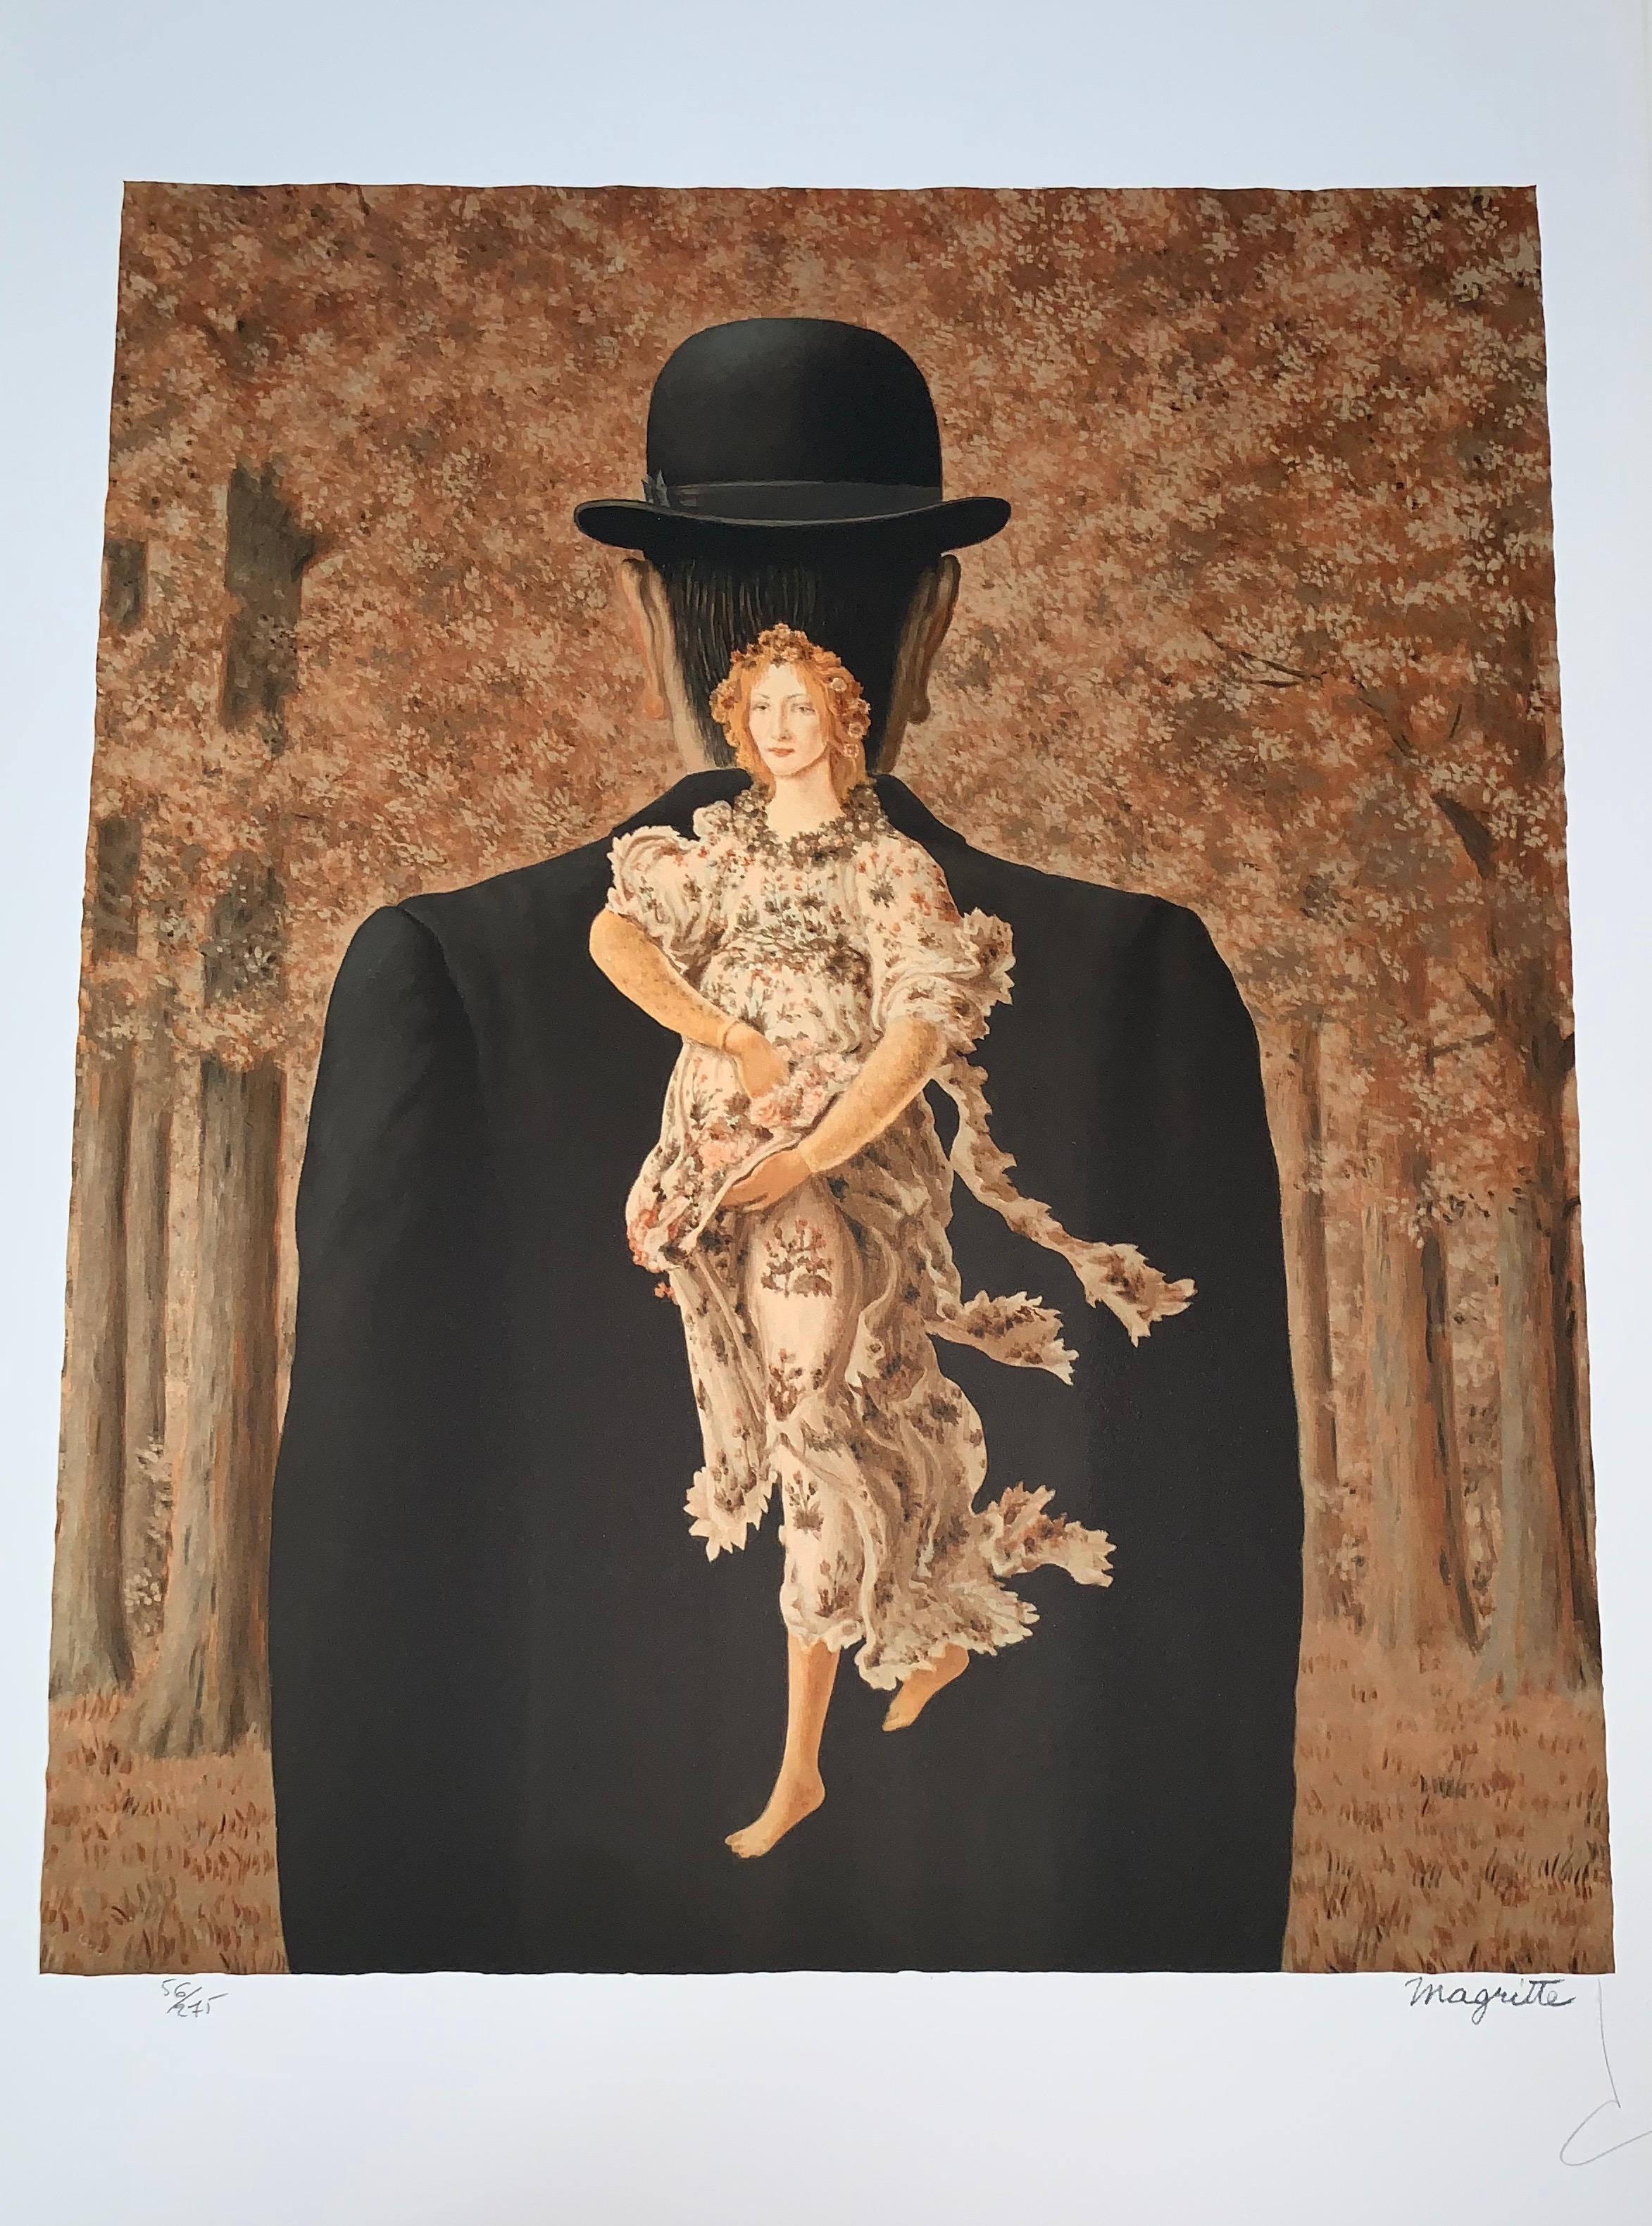 Color lithograph after the 1964 oil on canvas by René Magritte, printed signature of Magritte and numbered from the edition of 275. 
The lithograph features the dry stamps of the Magritte Foundation & ADAGP and is countersigned in pencil by Mr.